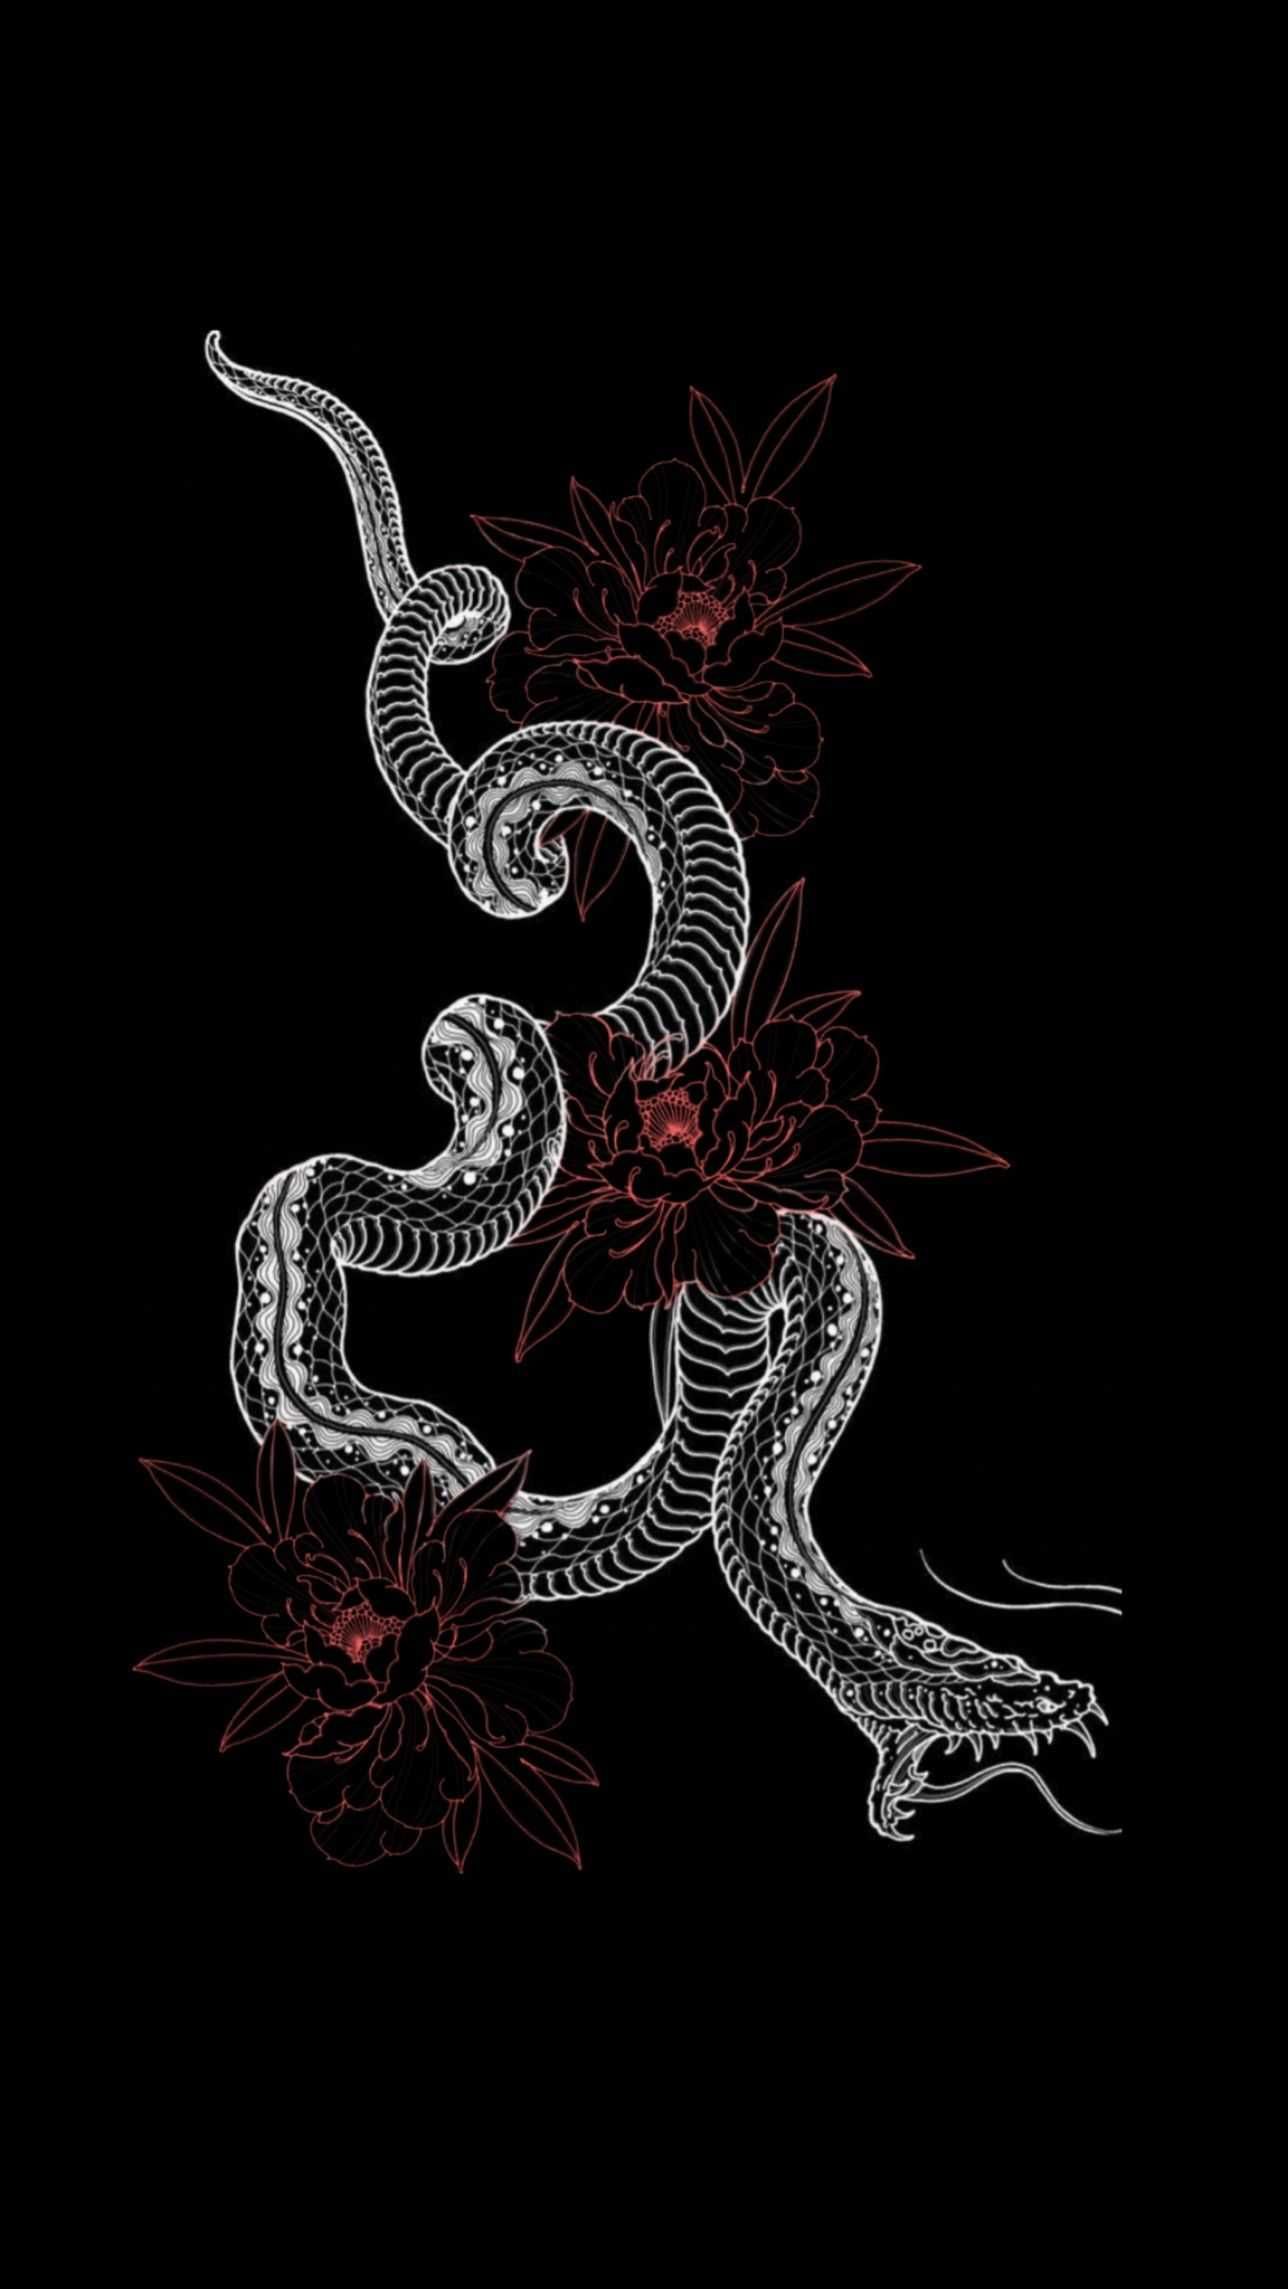 A black and white snake with flowers on it - Dragon, Japanese, snake